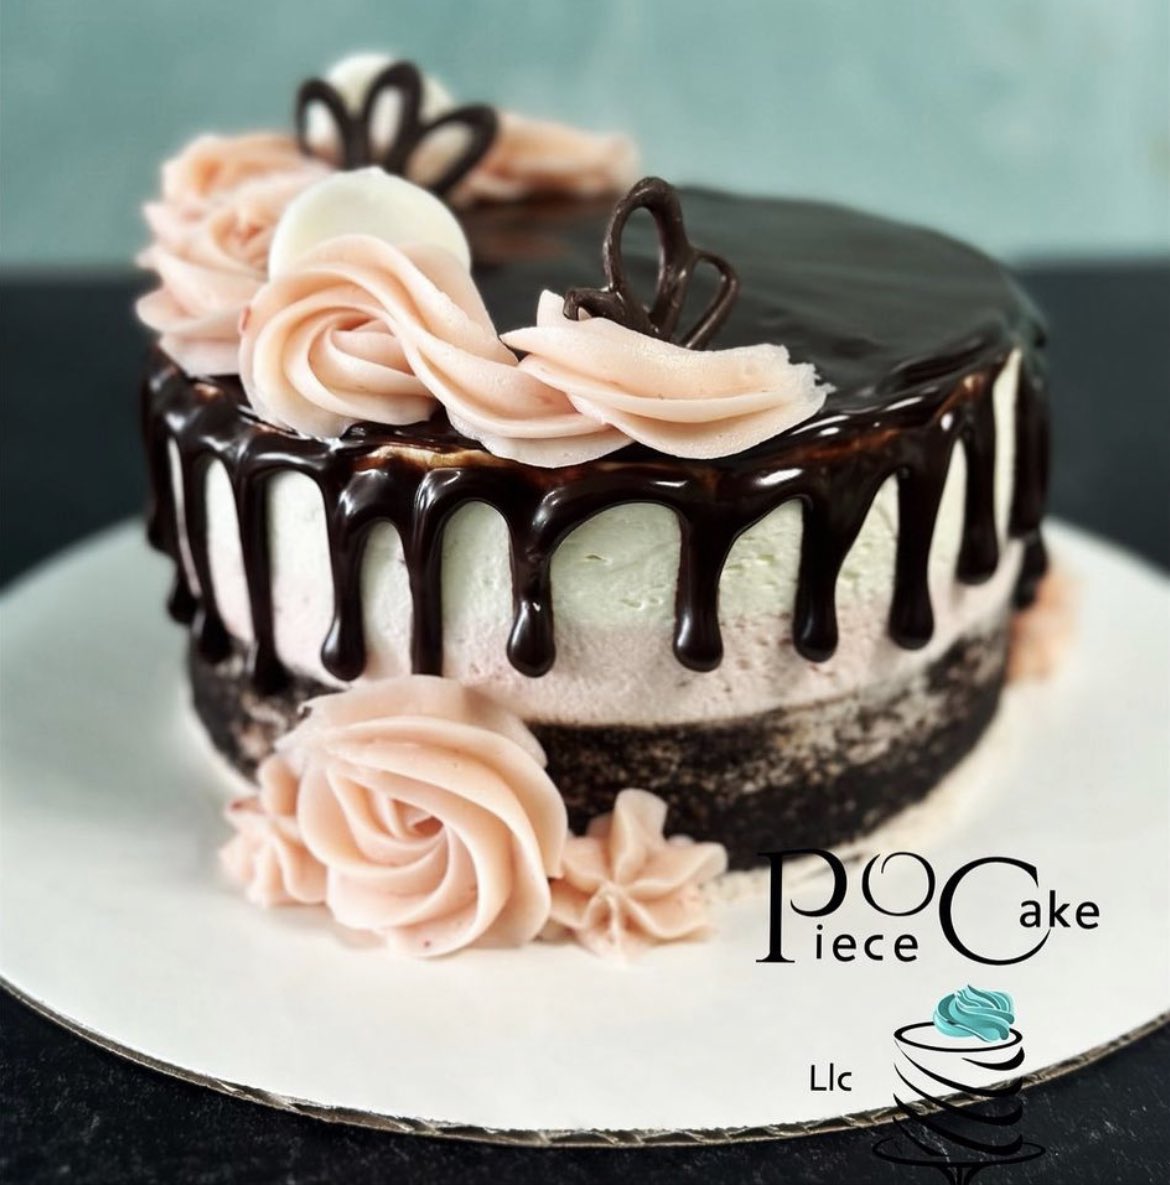 Another refresher for these hot summer days! Check out our variety of mousse torte flavors on our website! pieceocakellc.com Link in bio! Ordering online is a Piece O Cake! #cake #cakeshop #cakedecorating #dripcake #frederickmd #shoplocal #westviewvillageshoppingcenter